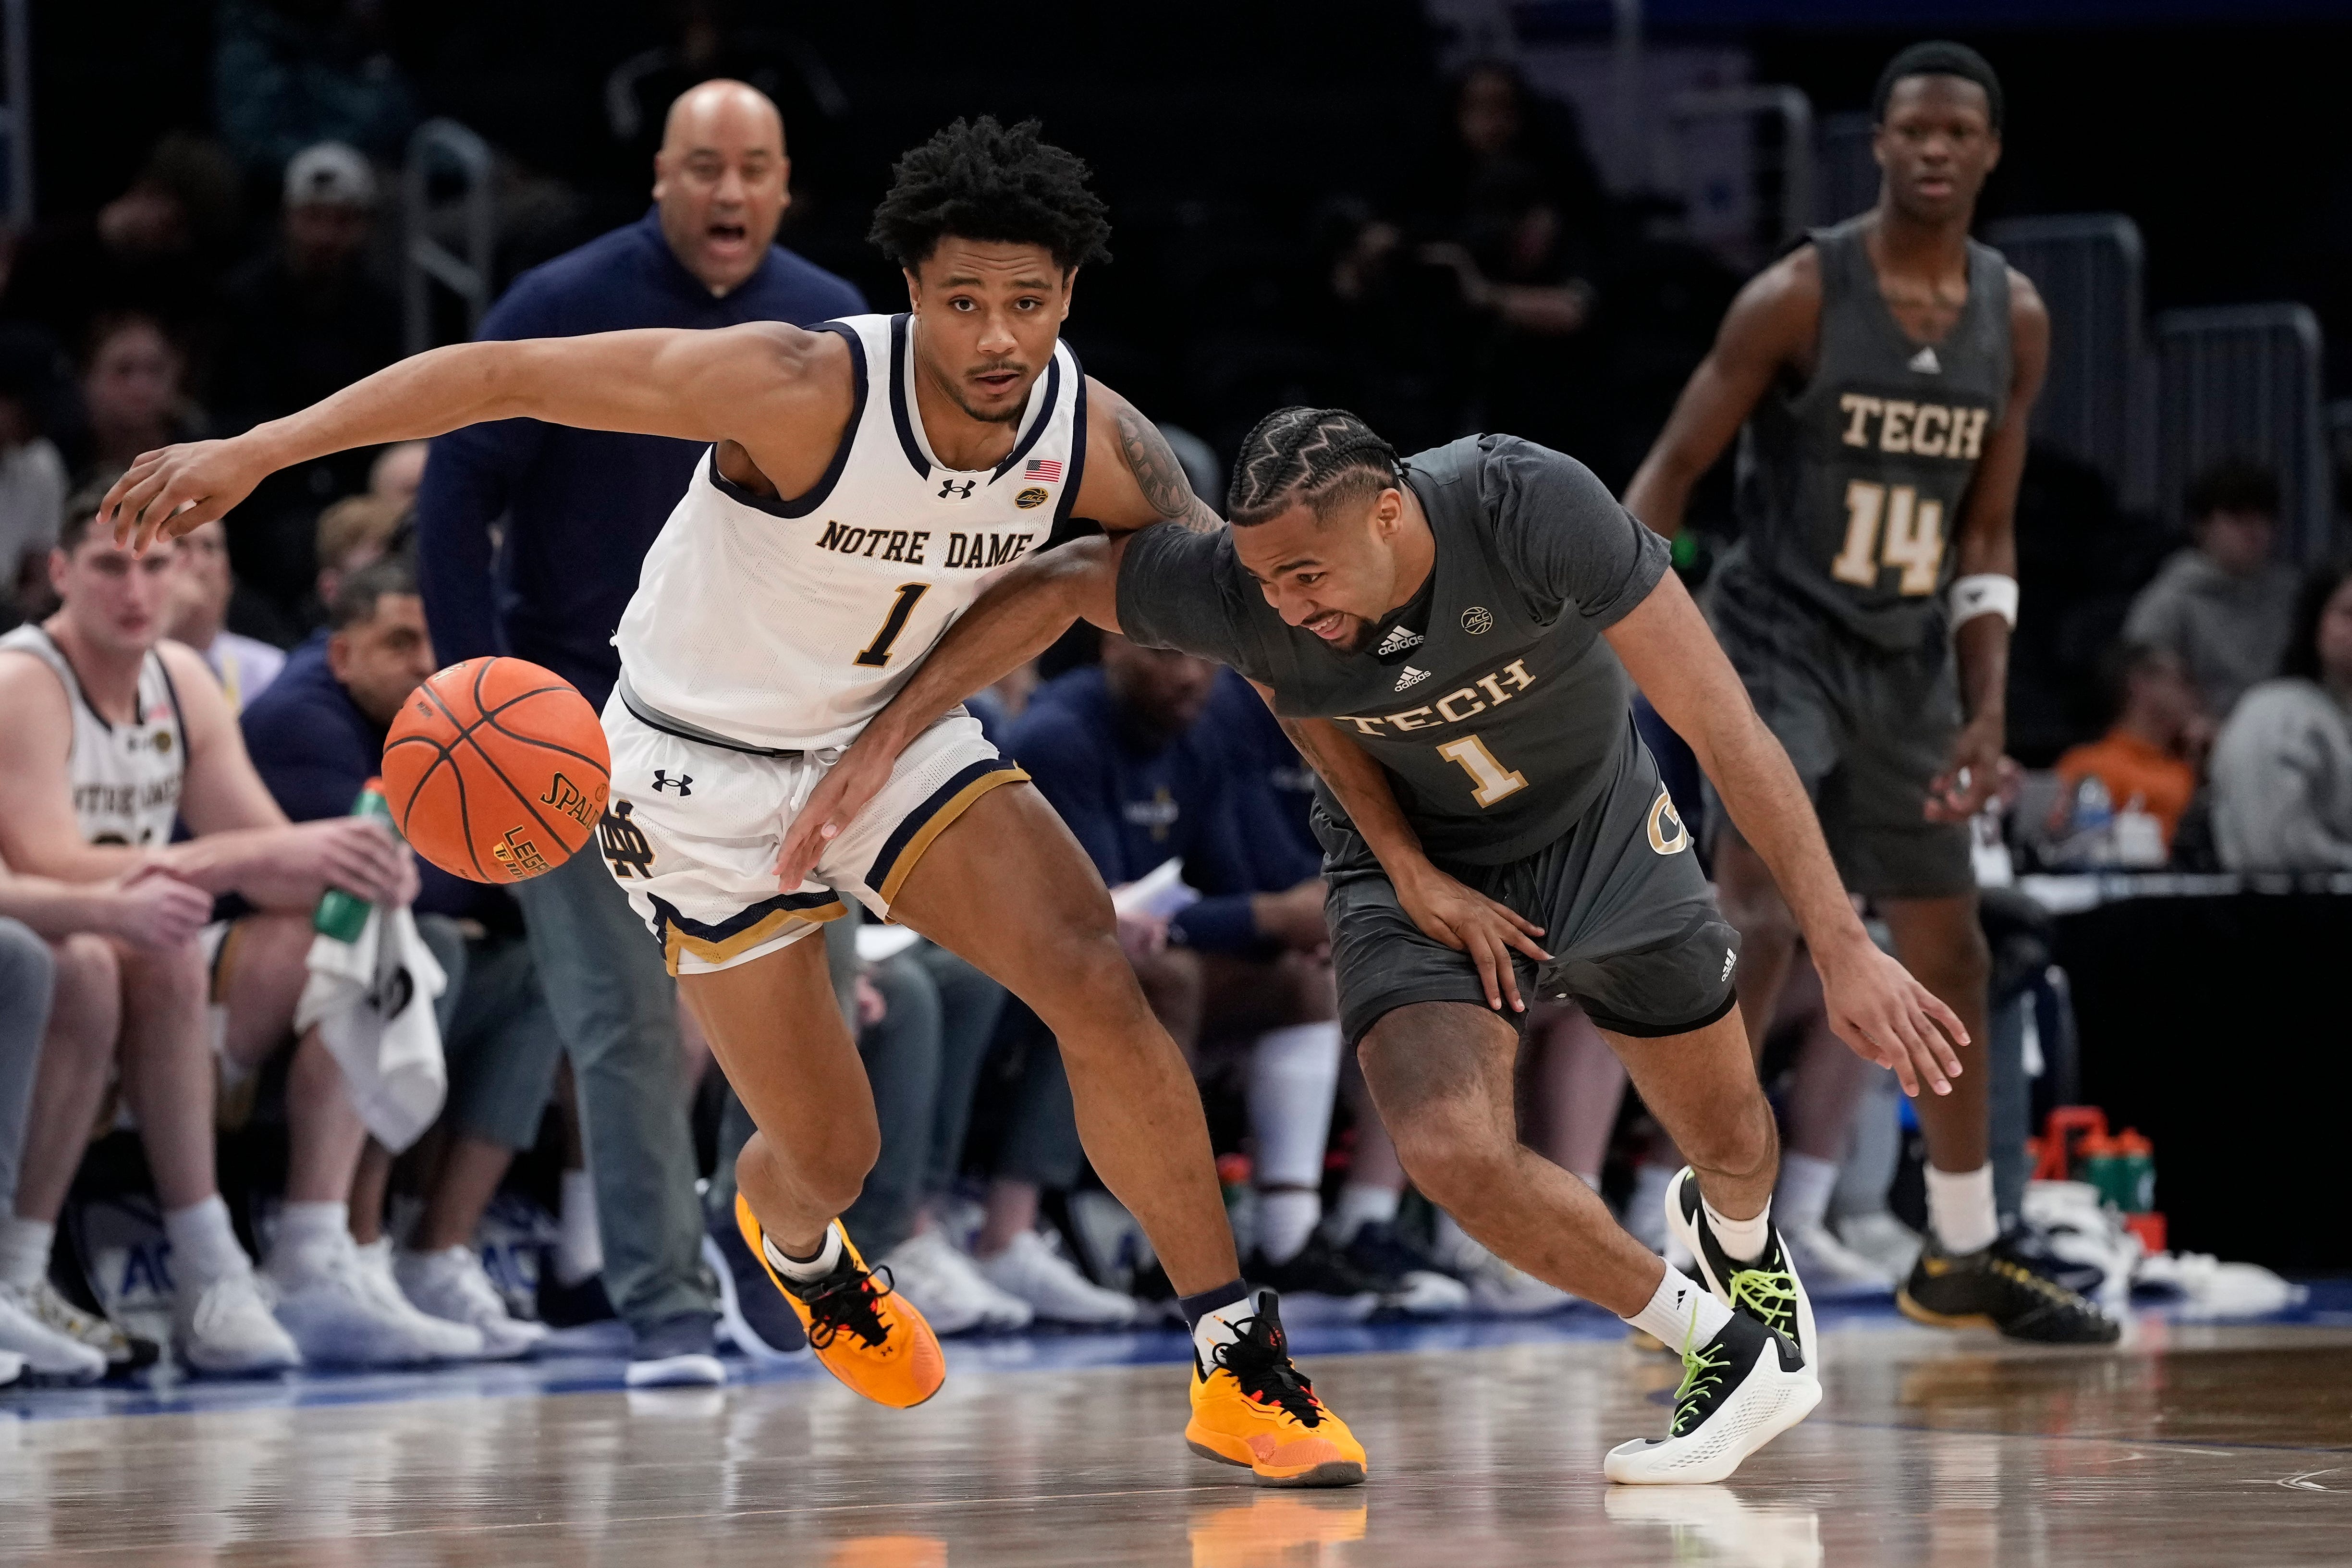 Notre Dame guard Julian Roper II (1) and Georgia Tech guard Kyle Sturdivant (1) chasing a loose ball during the first half of the Atlantic Coast Conference NCAA college basketball tournament Tuesday, March 12, 2024, in Washington. (AP Photo/Susan Walsh)